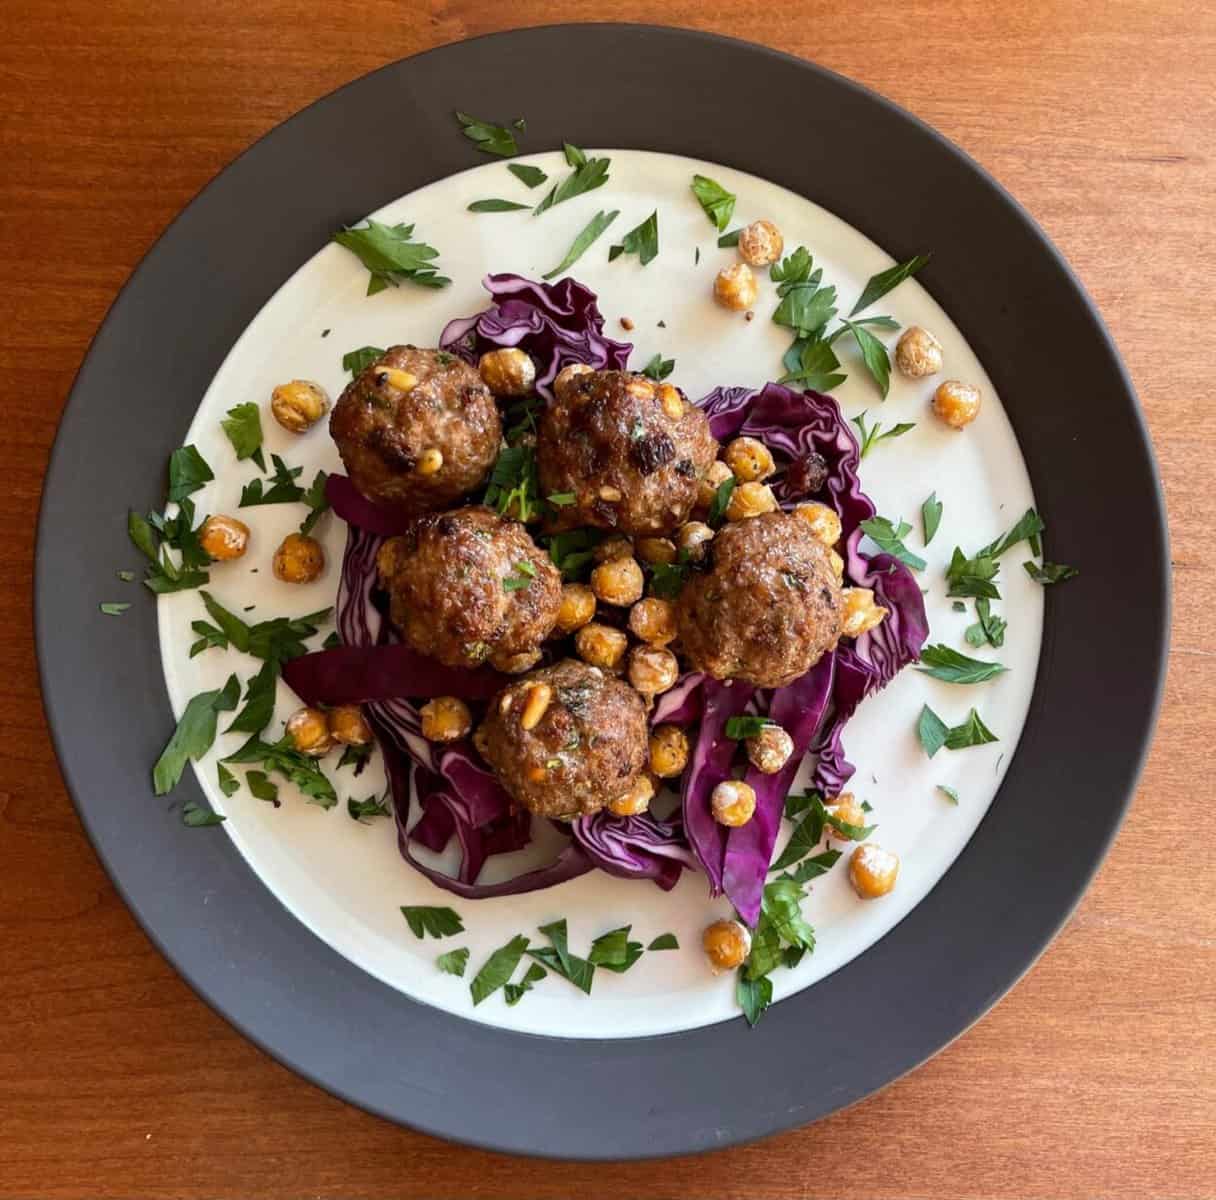 lamb meatballs with pine nuts and raisins atop fried chickpeas and purple cabbage.